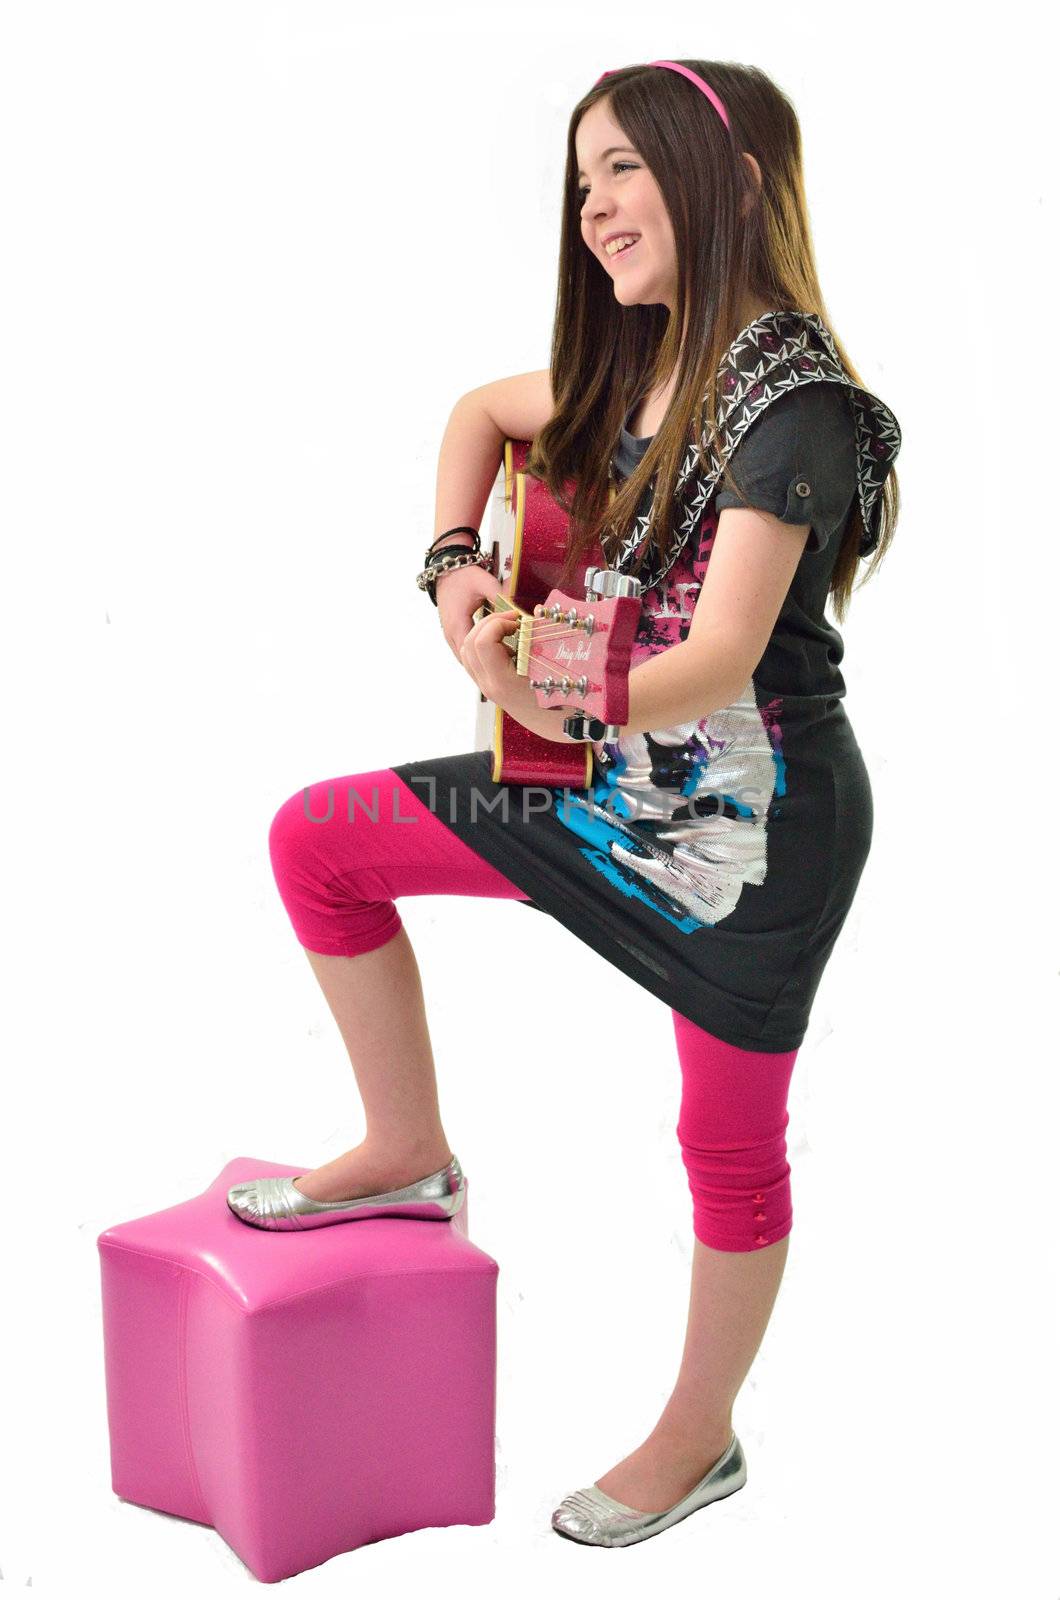 Young performer playing her guitar